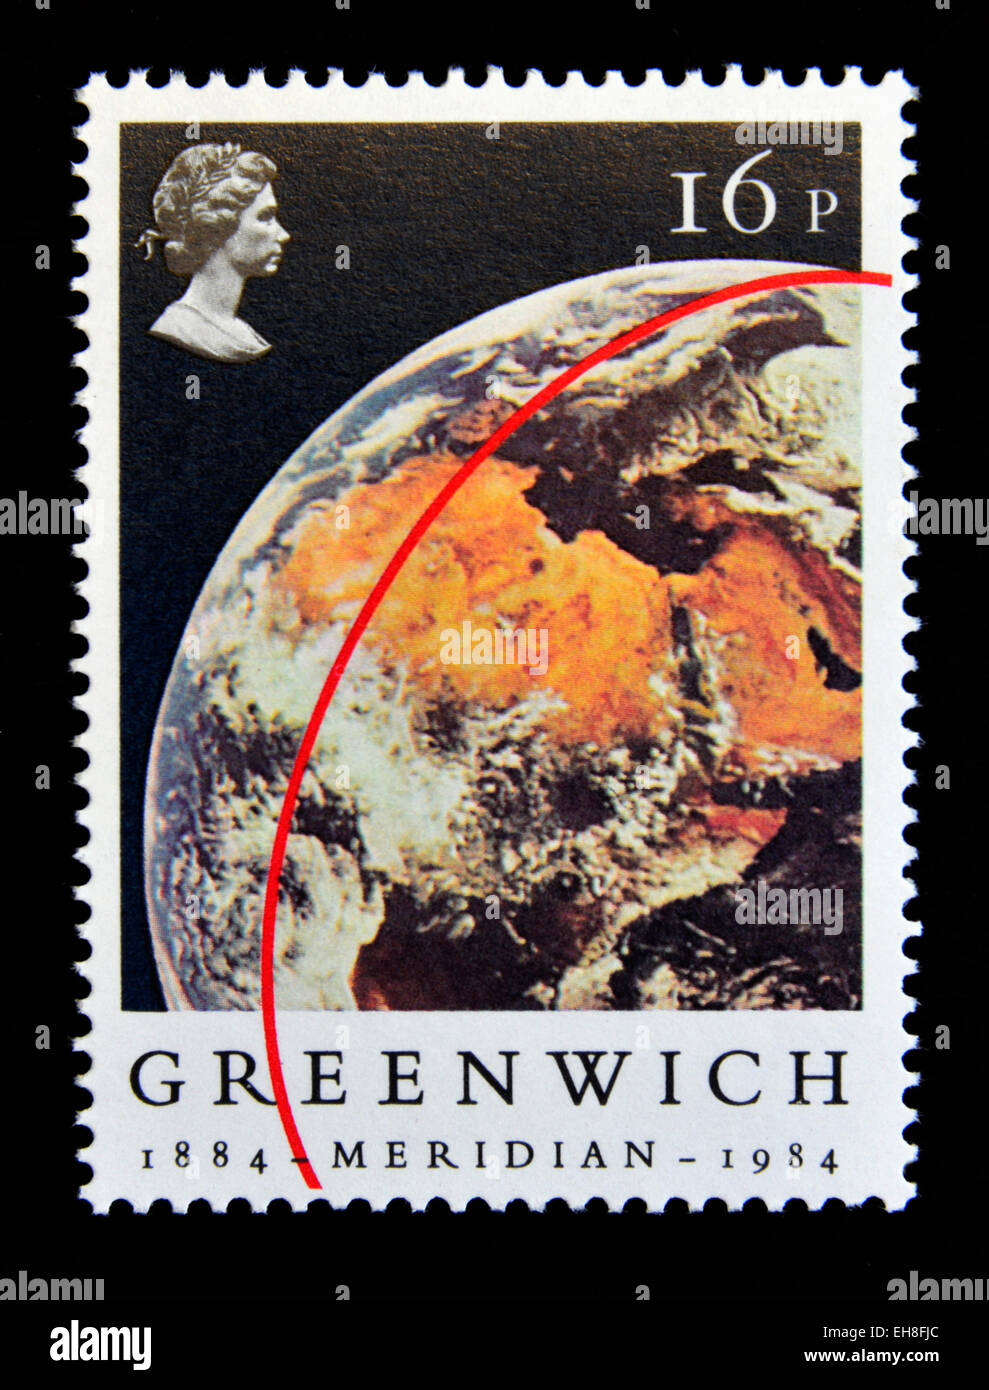 Postage stamp. Great Britain. Queen Elizabeth II. 1984. Centenary of the Greenwich Meridian. 16p. Stock Photo